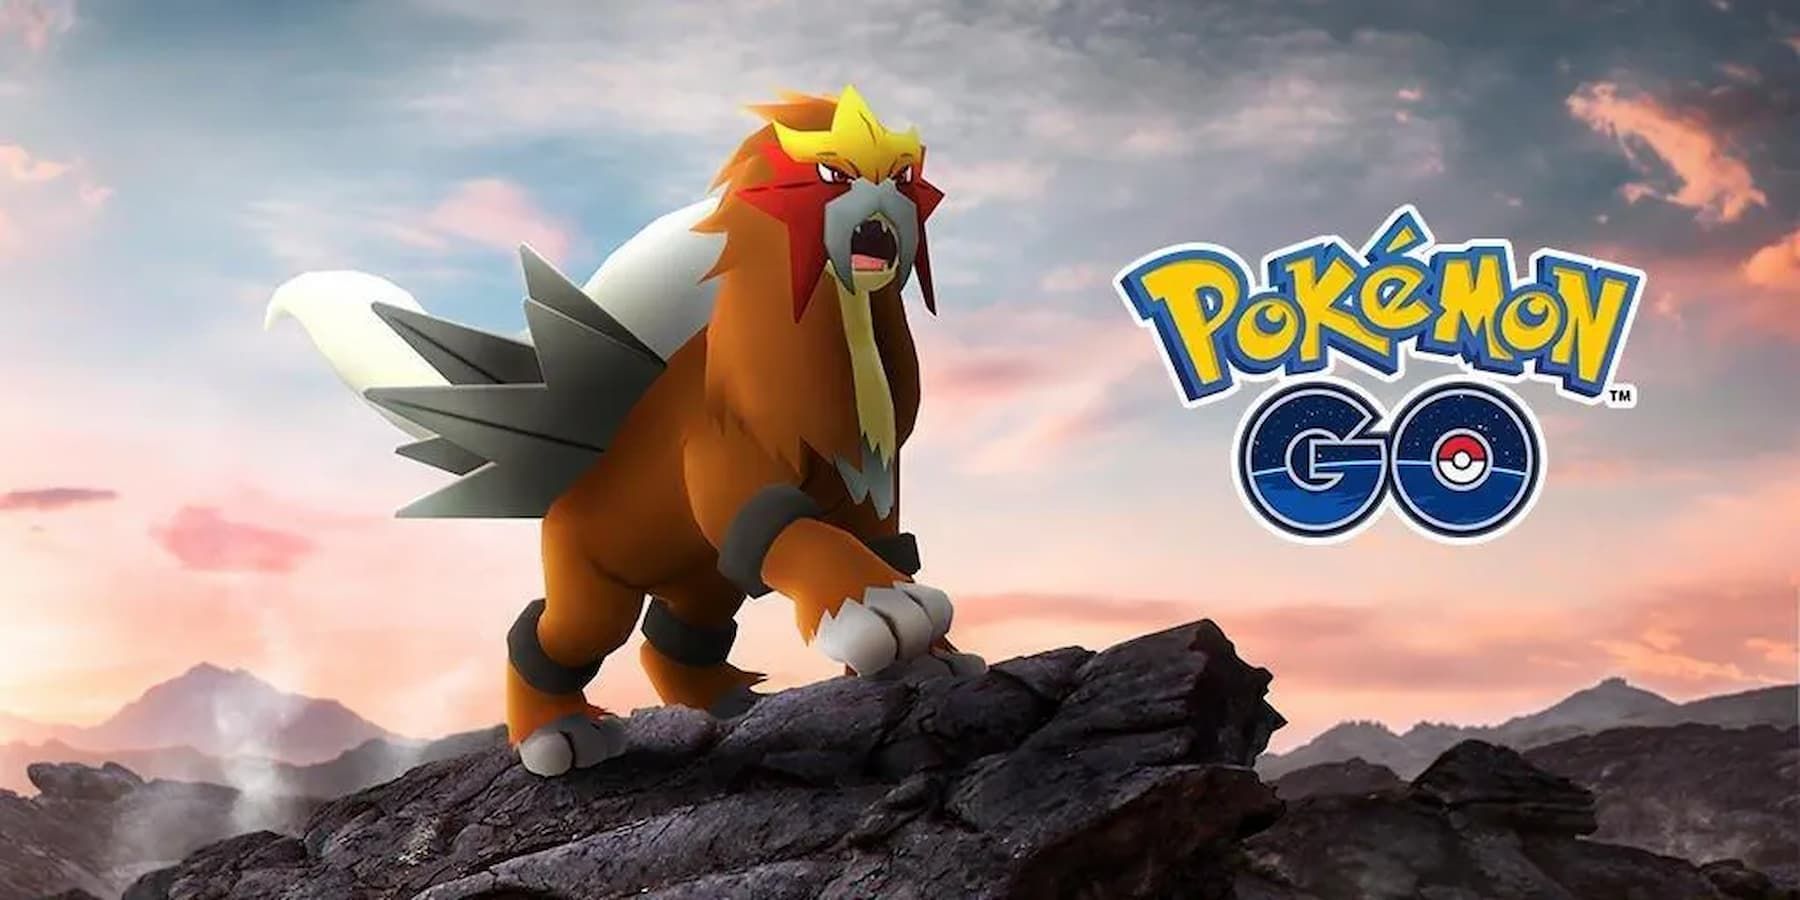 The Pokemon Entei from Pokemon Go standing on a rock